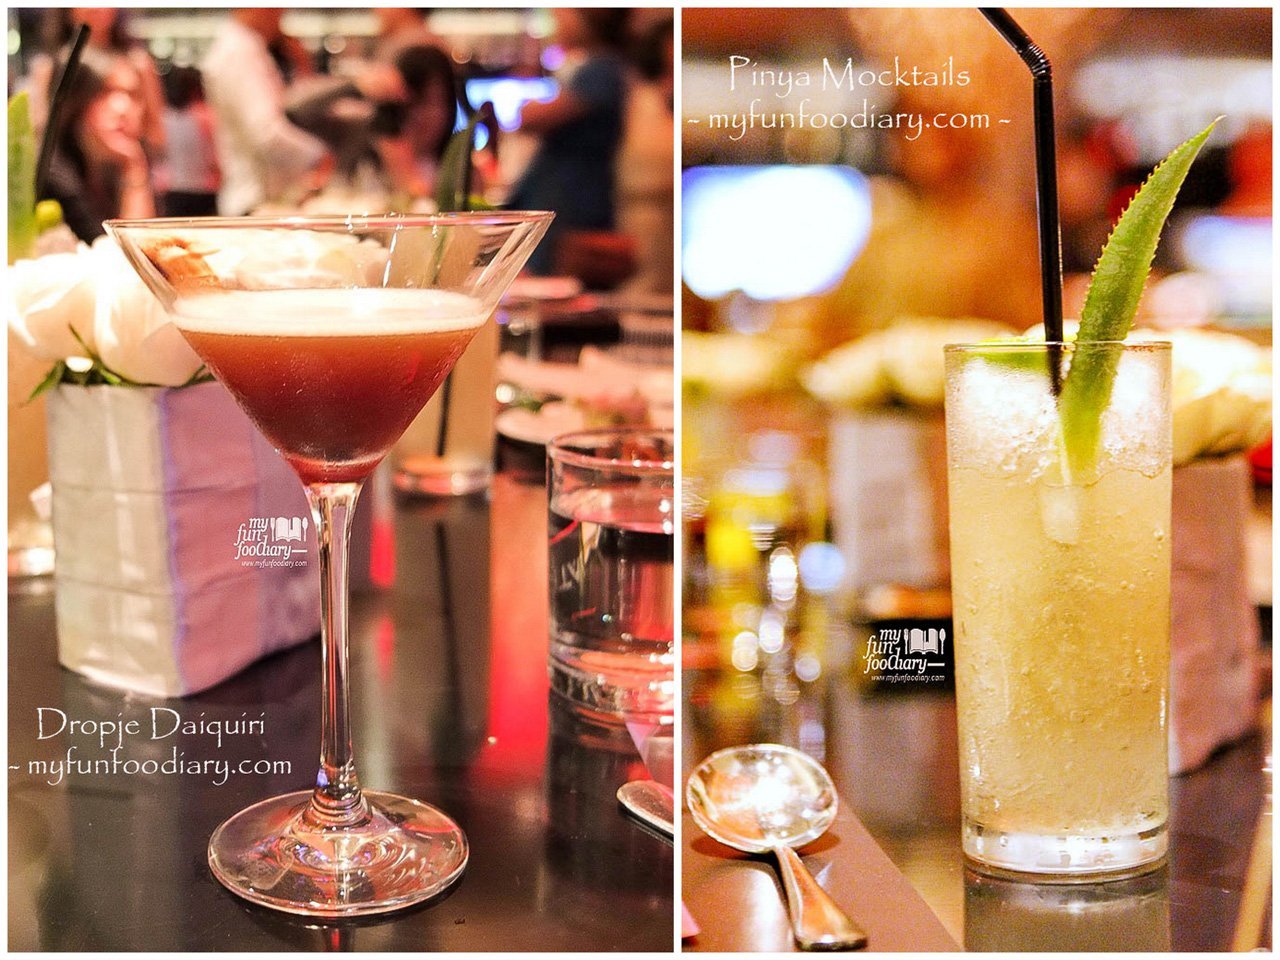 Cocktails and Mocktails at Moovina Plaza Indonesia - by Myfunfoodiary